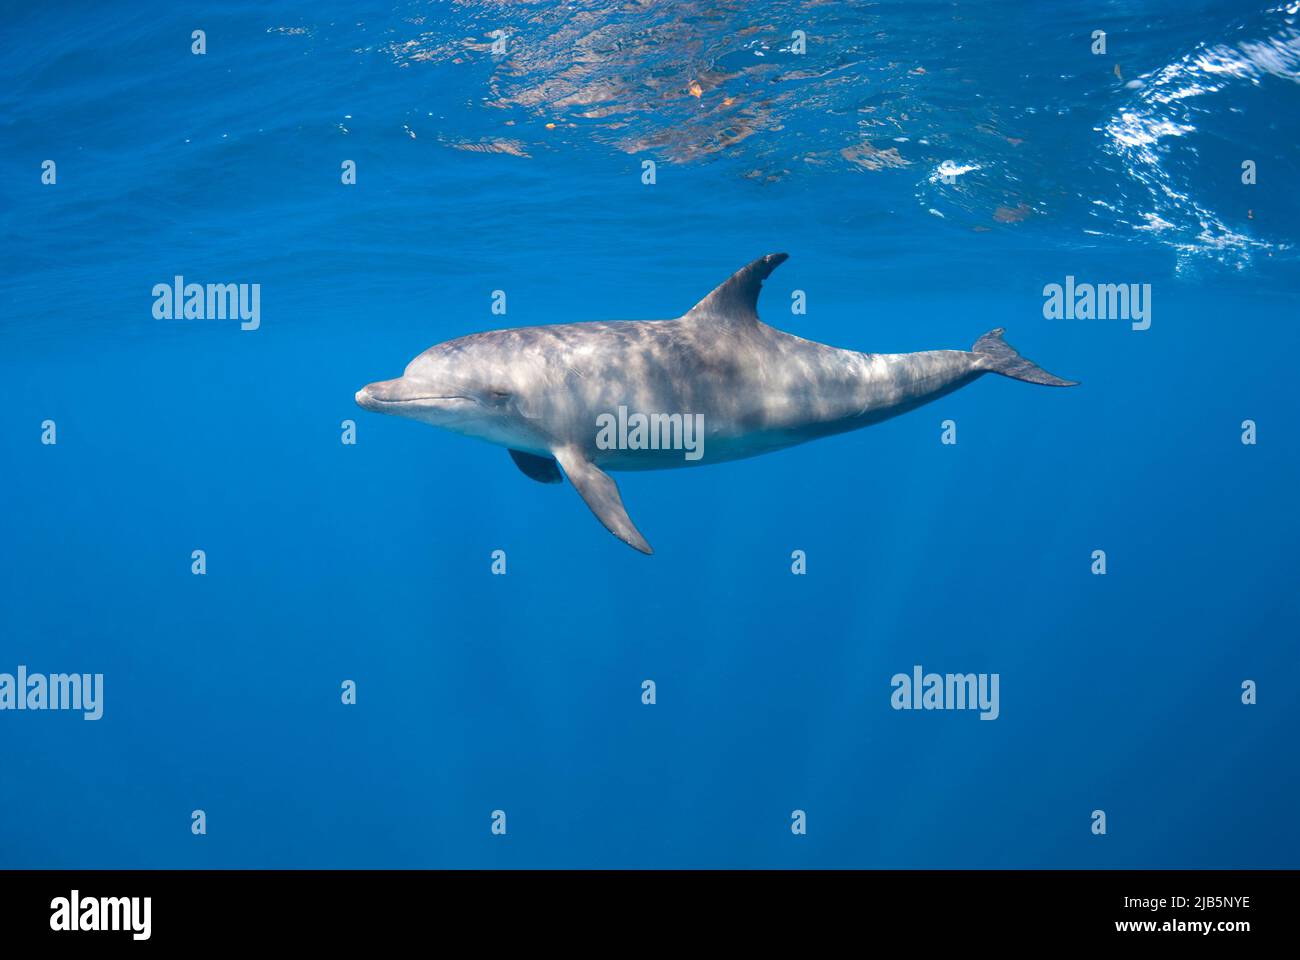 Indopacific bottlenosed dolphin (Tursiops aduncus) diving close to the surface in a blue background. Stock Photo